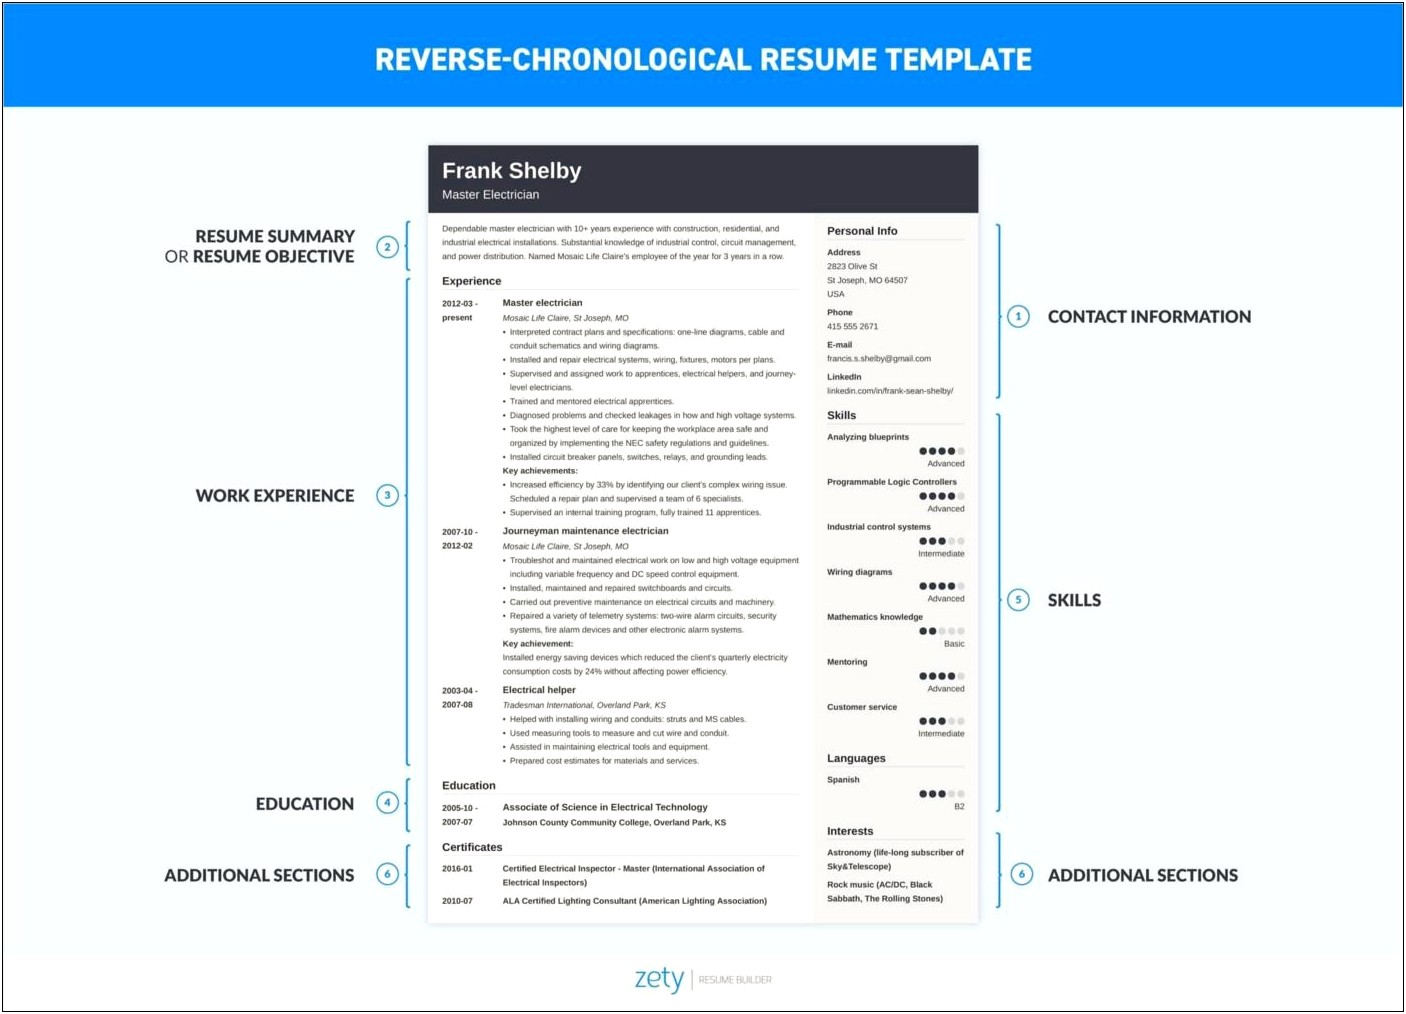 Your Resumé Should List Your Job History In